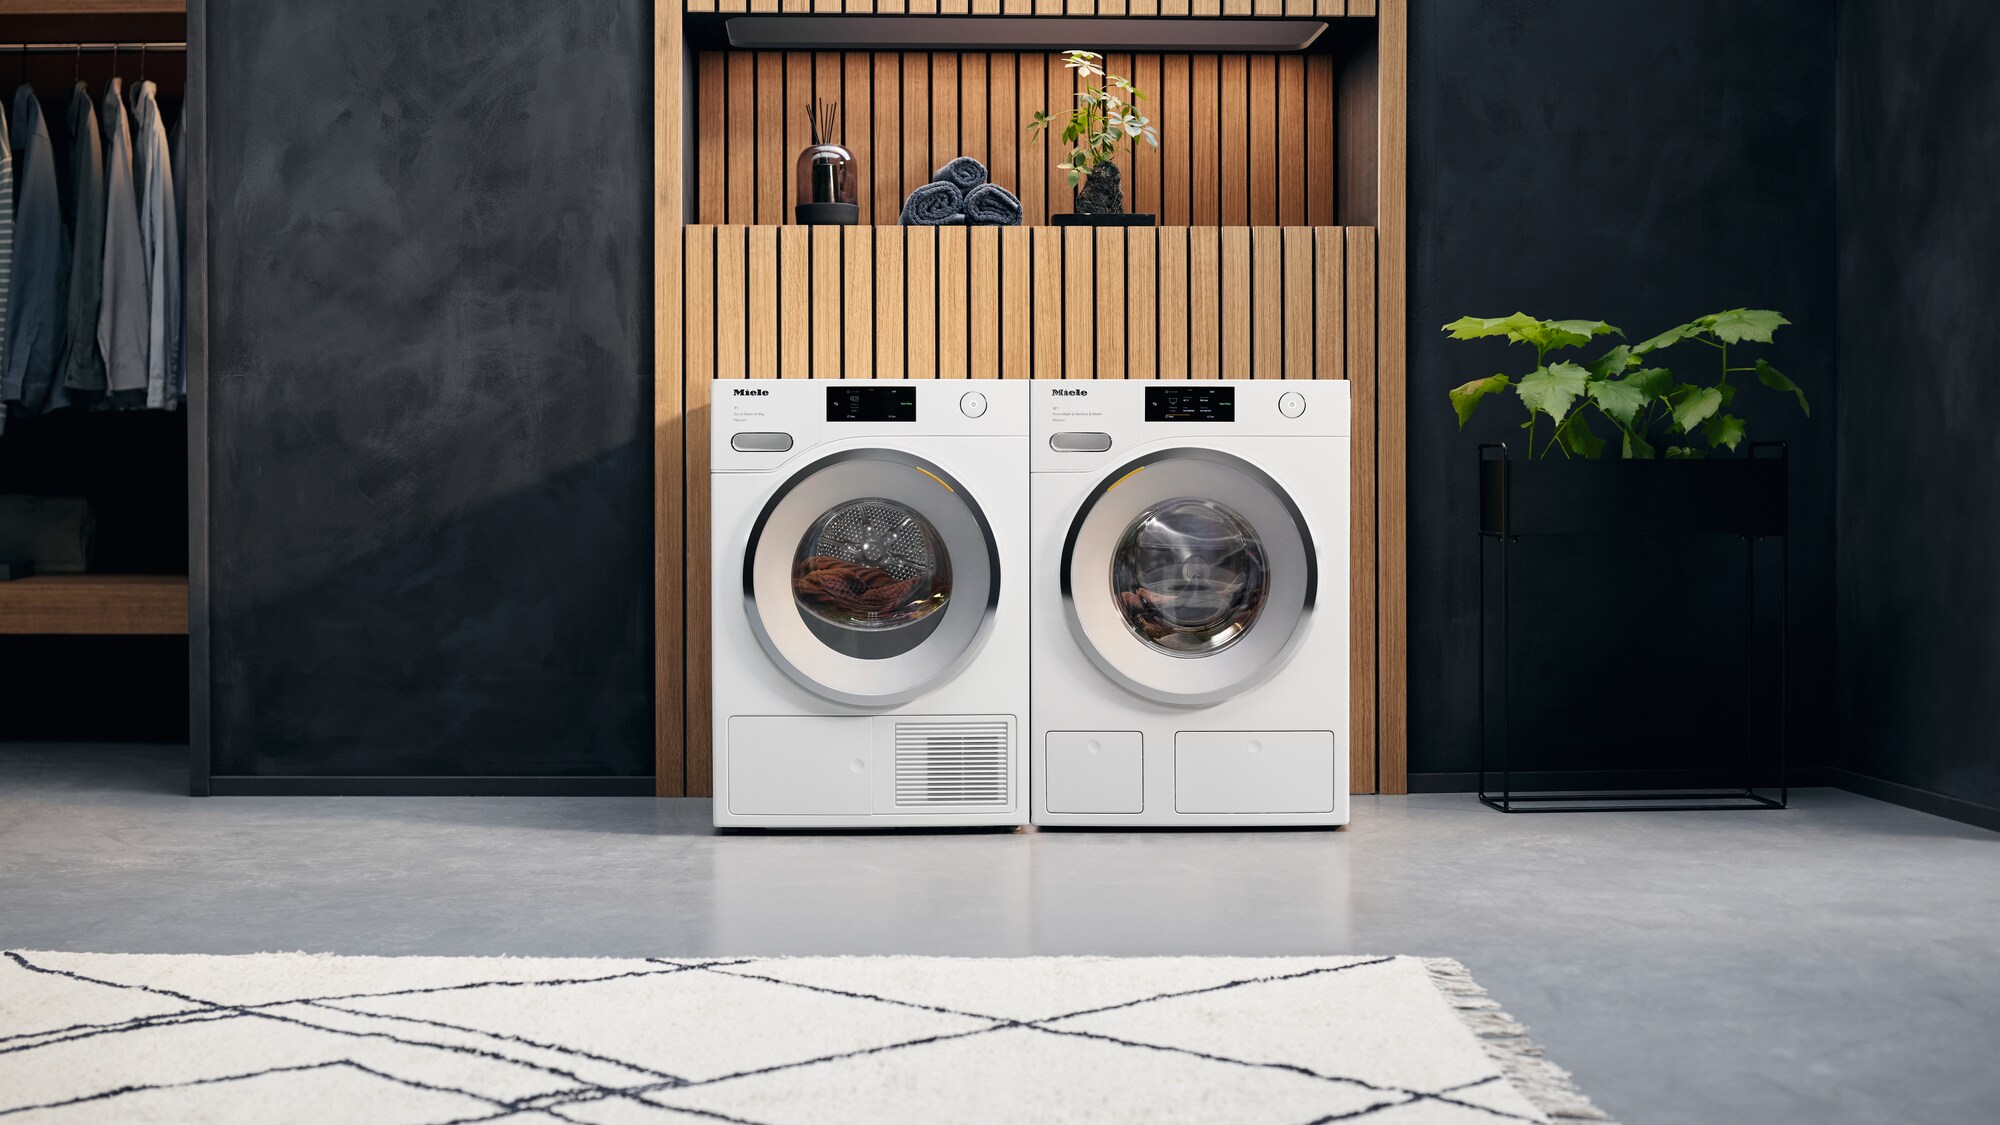 Miele-washing-machine-and-dryer-installed-side-by-side